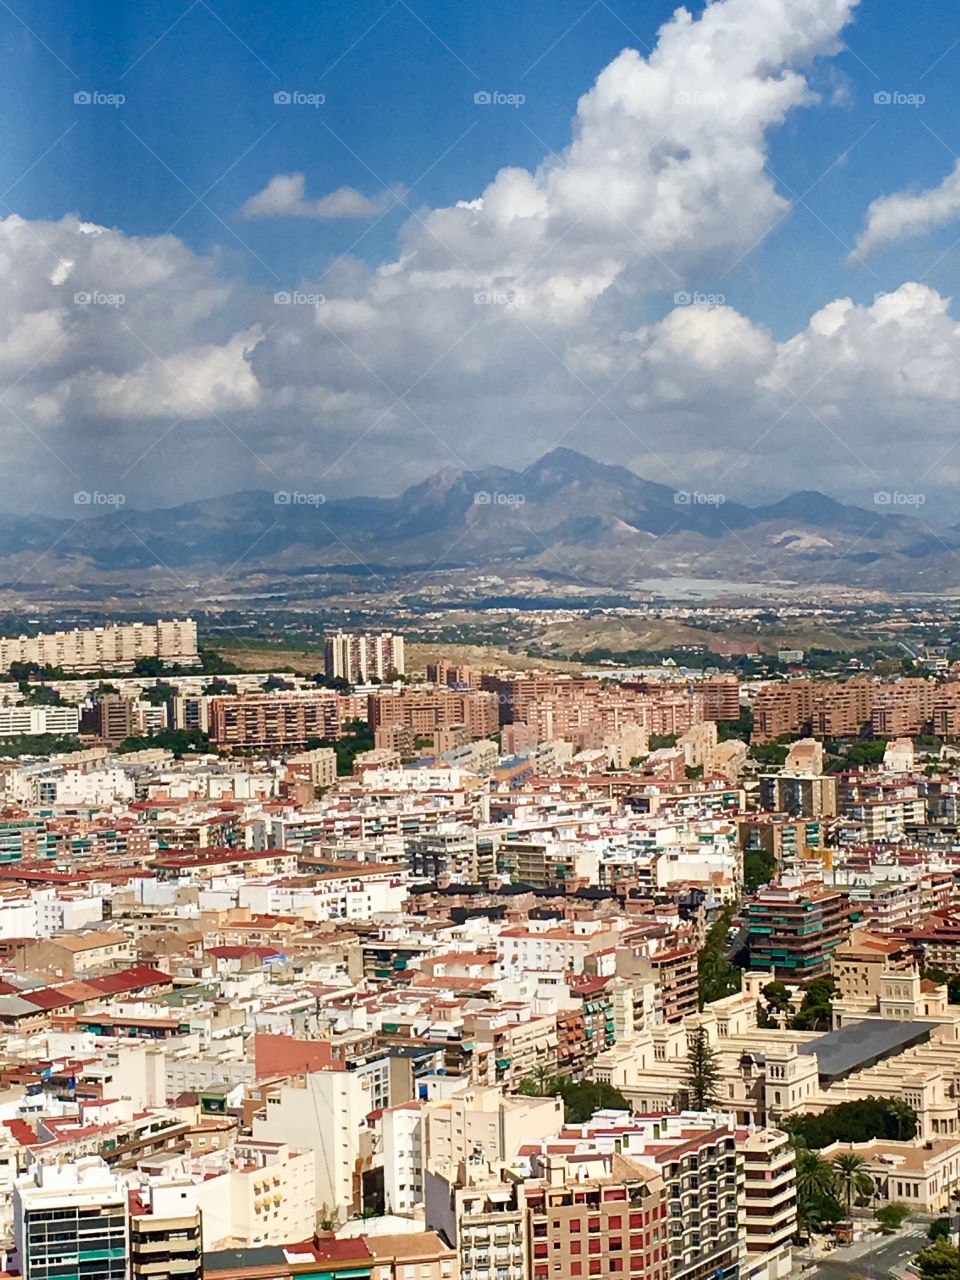 A picture of the city of Alicante, Spain with mountains in the distance. Taken from a high castle 